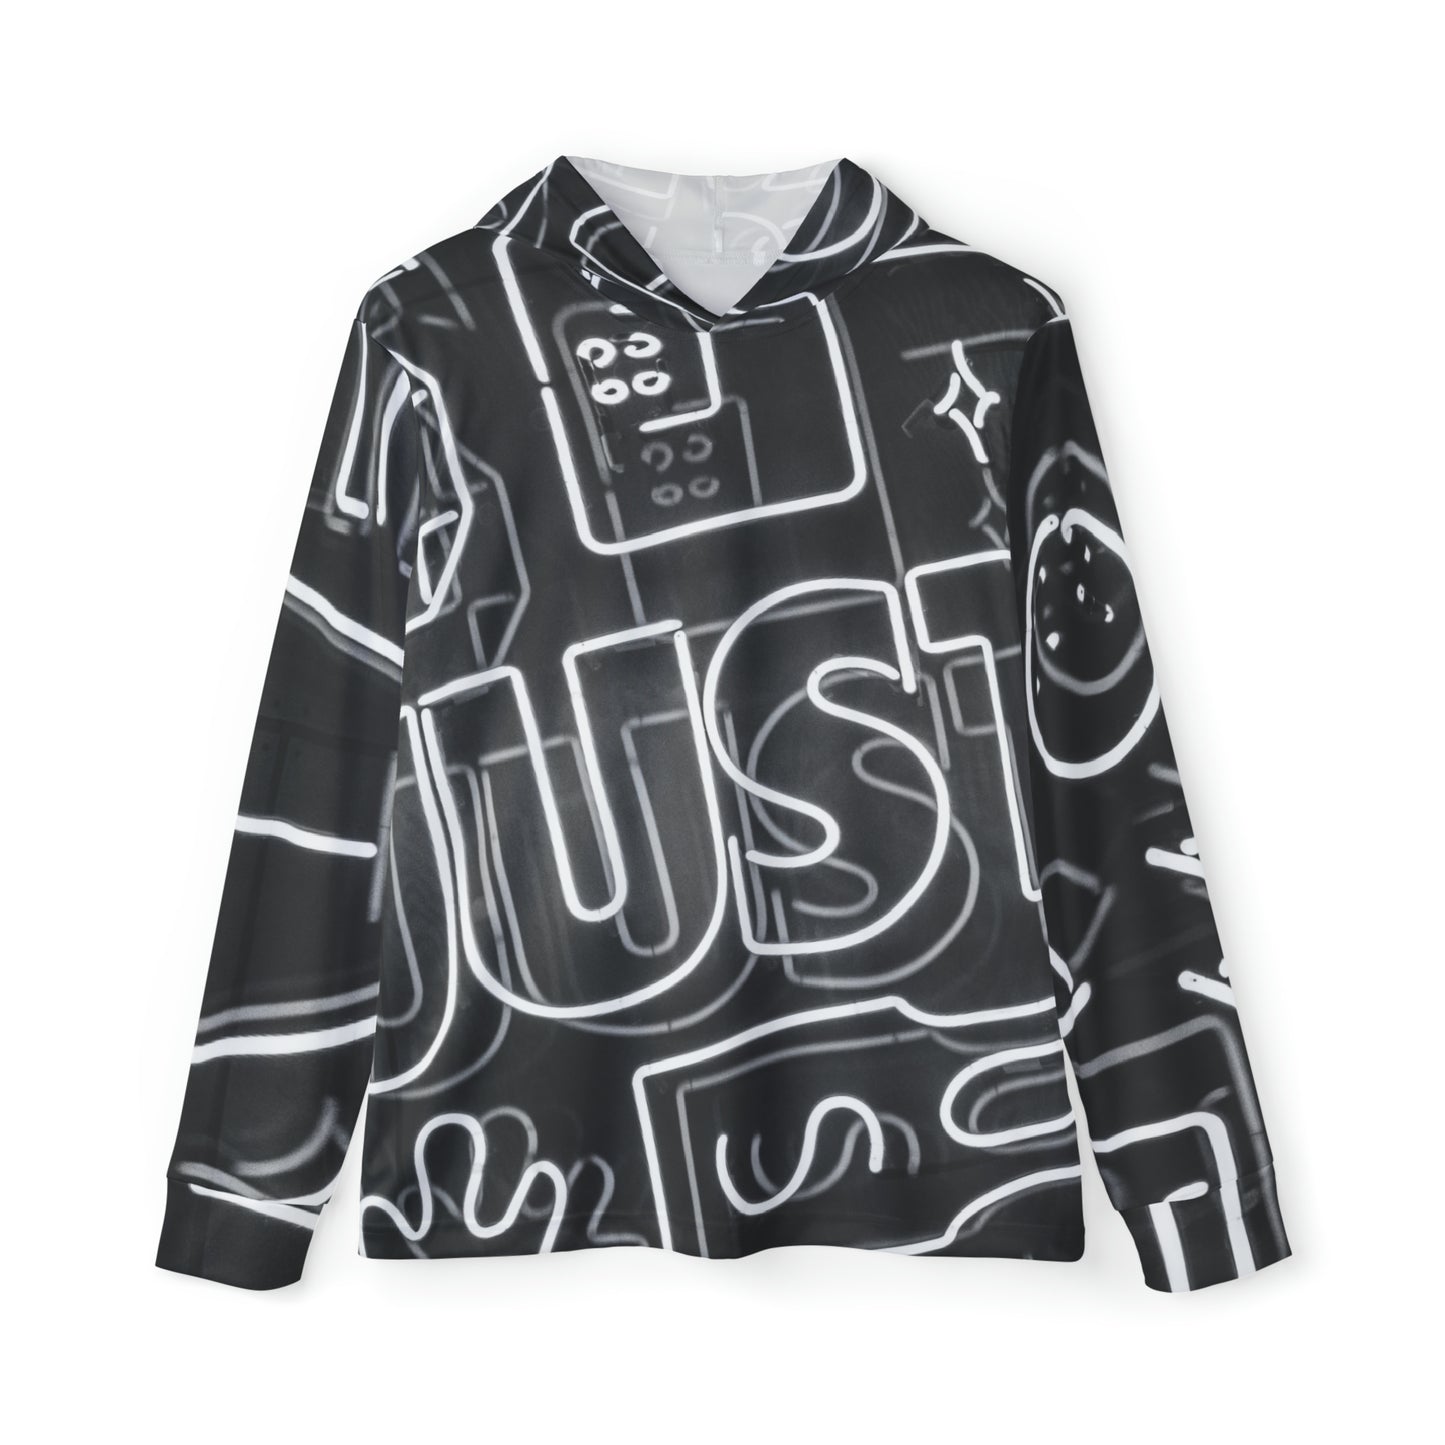 Sports Warmup Hoodie | Just Do It - Ribooa